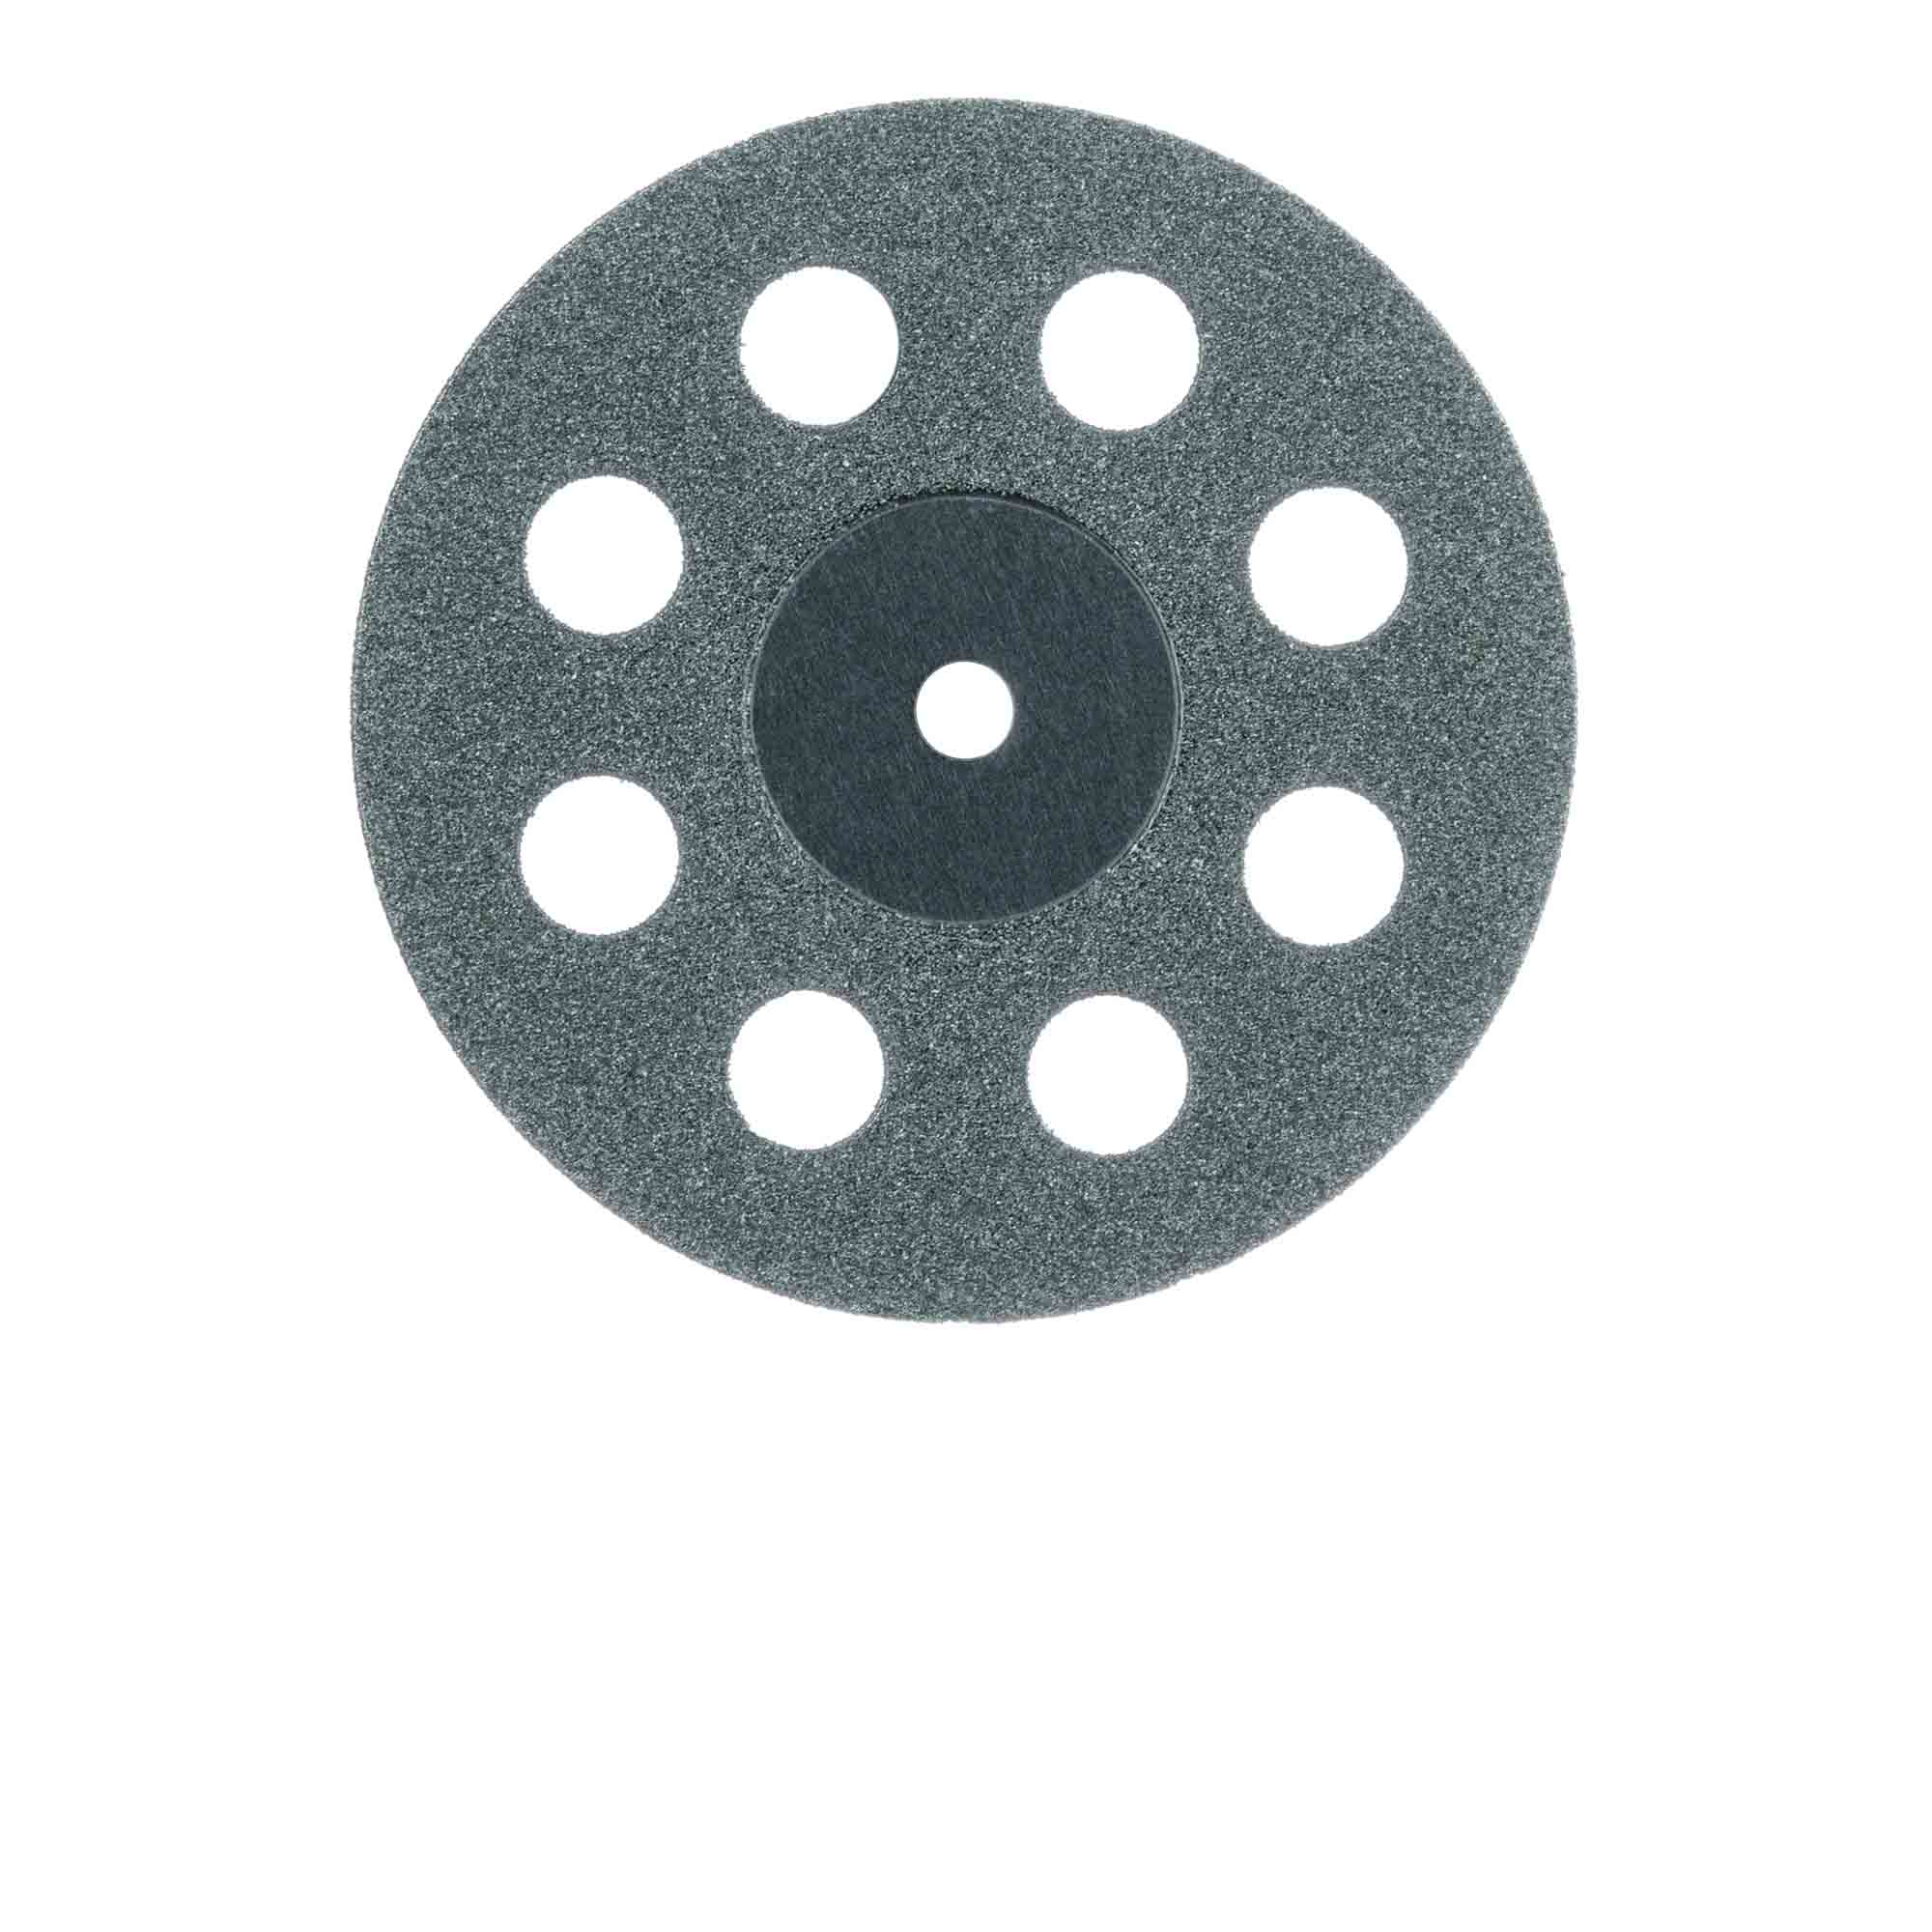 932DF-220-HP Diamond Bur, Perforated Disc, Double Sided, 0.25mm Thick, 22 mm Ø, Fine, HP